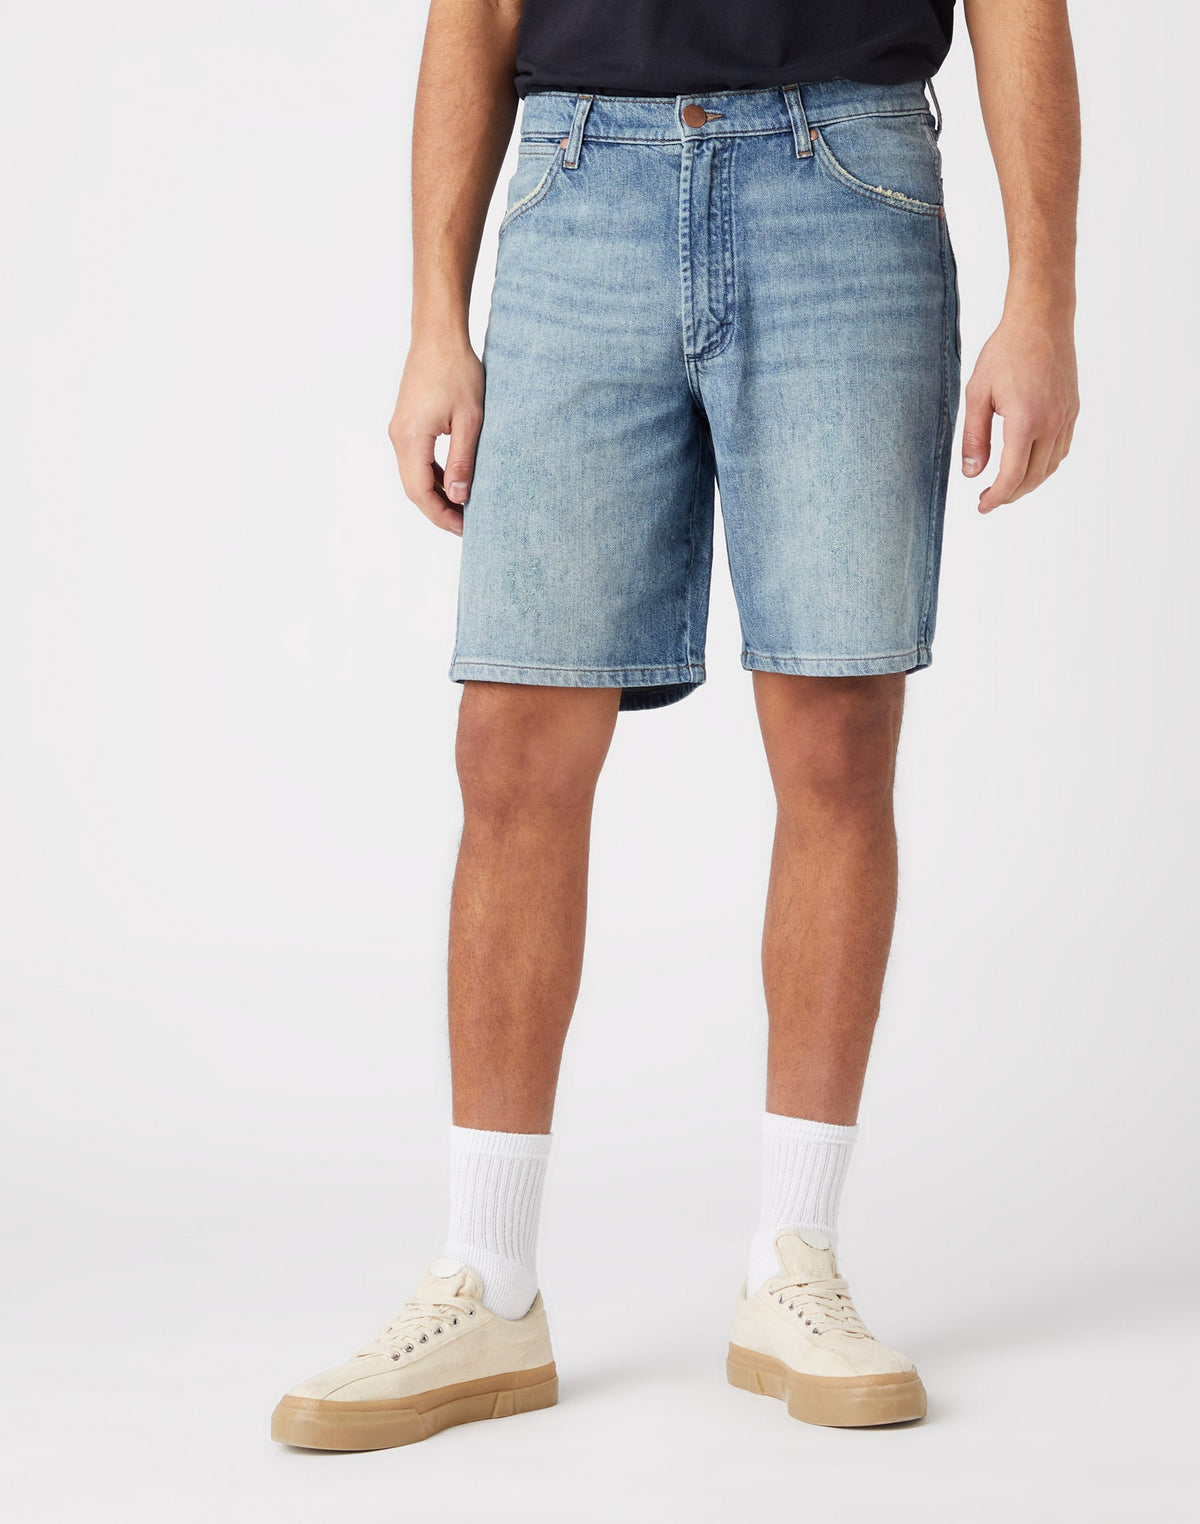 Redding Shorts in Clear Blue